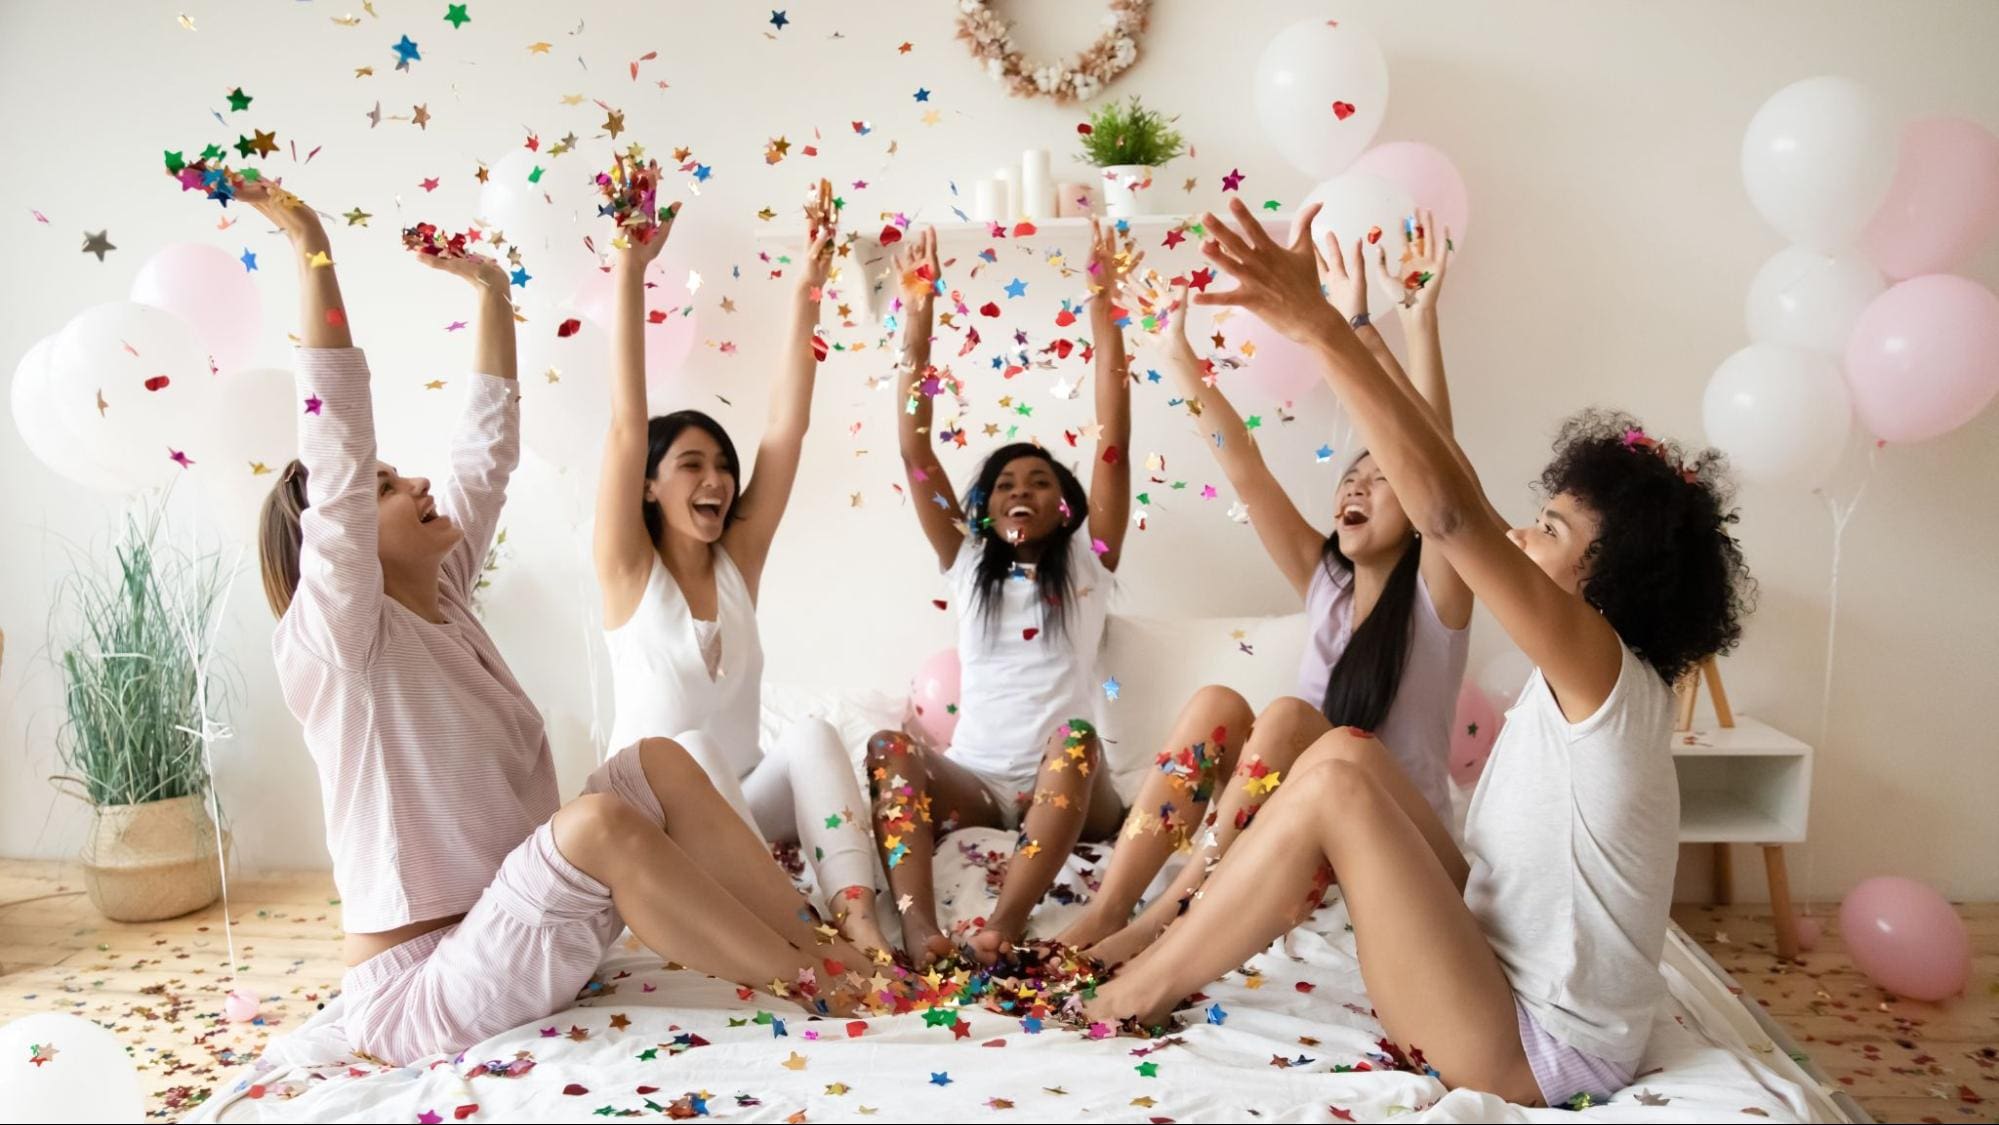 Group of joyful friends throwing confetti while sitting on a bed during a party, with balloons and festive atmosphere.